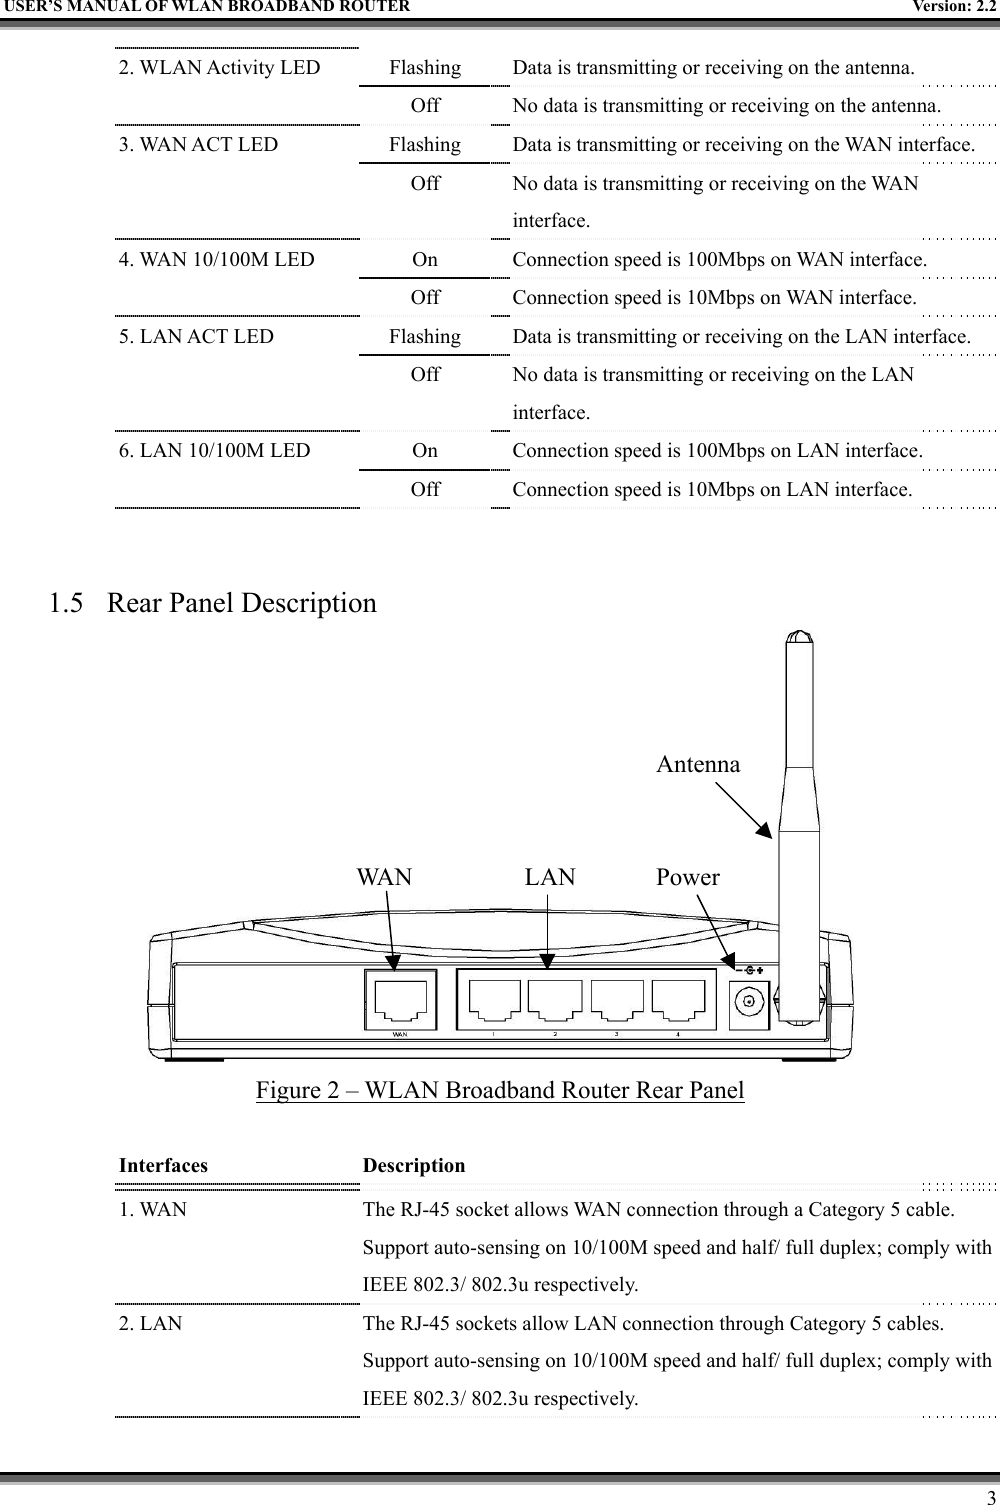   USER’S MANUAL OF WLAN BROADBAND ROUTER    Version: 2.2     3 2. WLAN Activity LED    Flashing  Data is transmitting or receiving on the antenna.     Off  No data is transmitting or receiving on the antenna. 3. WAN ACT LED    Flashing  Data is transmitting or receiving on the WAN interface.     Off  No data is transmitting or receiving on the WAN interface. 4. WAN 10/100M LED    On  Connection speed is 100Mbps on WAN interface.     Off  Connection speed is 10Mbps on WAN interface. 5. LAN ACT LED    Flashing  Data is transmitting or receiving on the LAN interface.     Off  No data is transmitting or receiving on the LAN interface. 6. LAN 10/100M LED    On  Connection speed is 100Mbps on LAN interface.     Off  Connection speed is 10Mbps on LAN interface.   1.5  Rear Panel Description  Figure 2 – WLAN Broadband Router Rear Panel  Interfaces  Description 1. WAN    The RJ-45 socket allows WAN connection through a Category 5 cable. Support auto-sensing on 10/100M speed and half/ full duplex; comply with IEEE 802.3/ 802.3u respectively. 2. LAN    The RJ-45 sockets allow LAN connection through Category 5 cables. Support auto-sensing on 10/100M speed and half/ full duplex; comply with IEEE 802.3/ 802.3u respectively. WAN LAN PowerAntenna